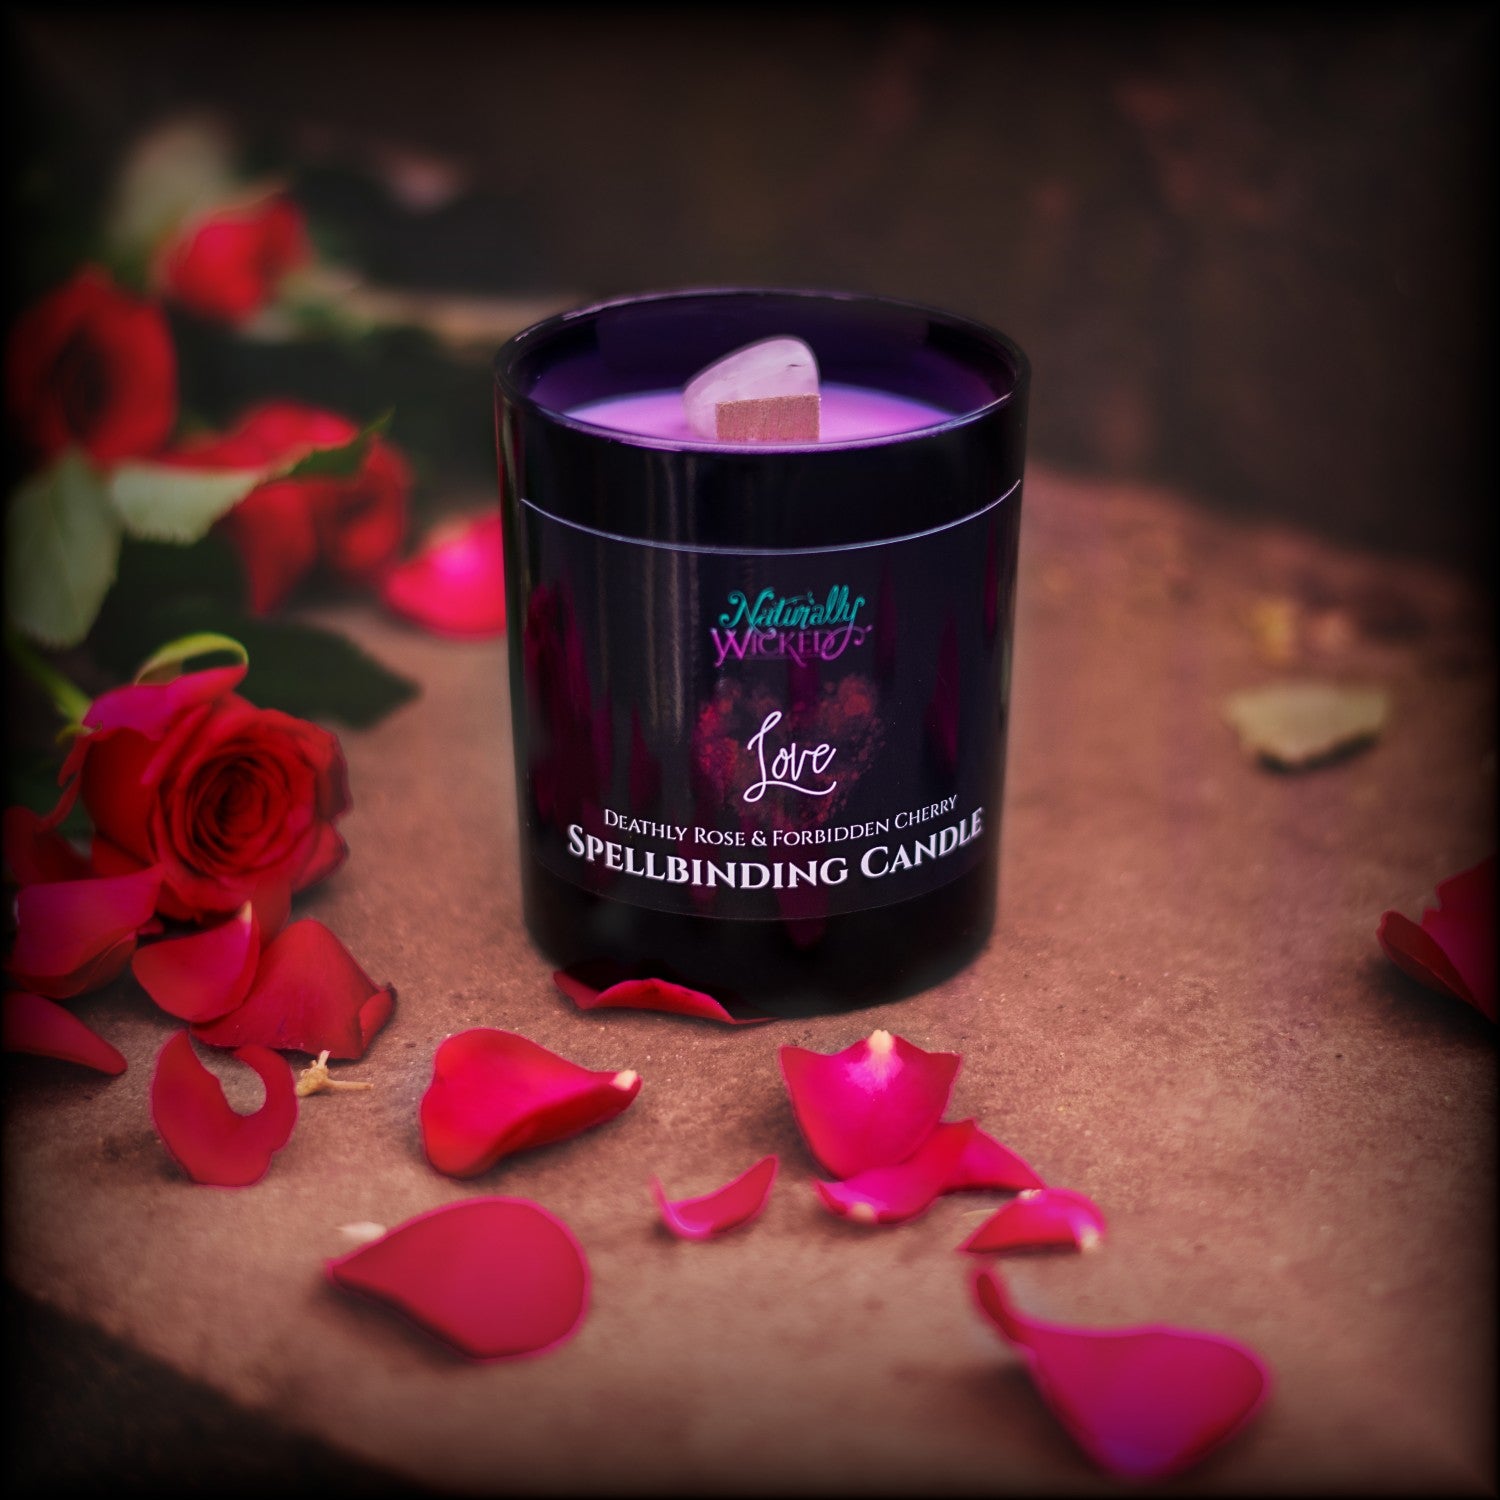 Naturally Wicked Spellbinding Love Spell Candle Entombed With Bright Pink Rose Quartz Love Crystal Sits On Romantic Steps Drizzled In Red Rose Petals